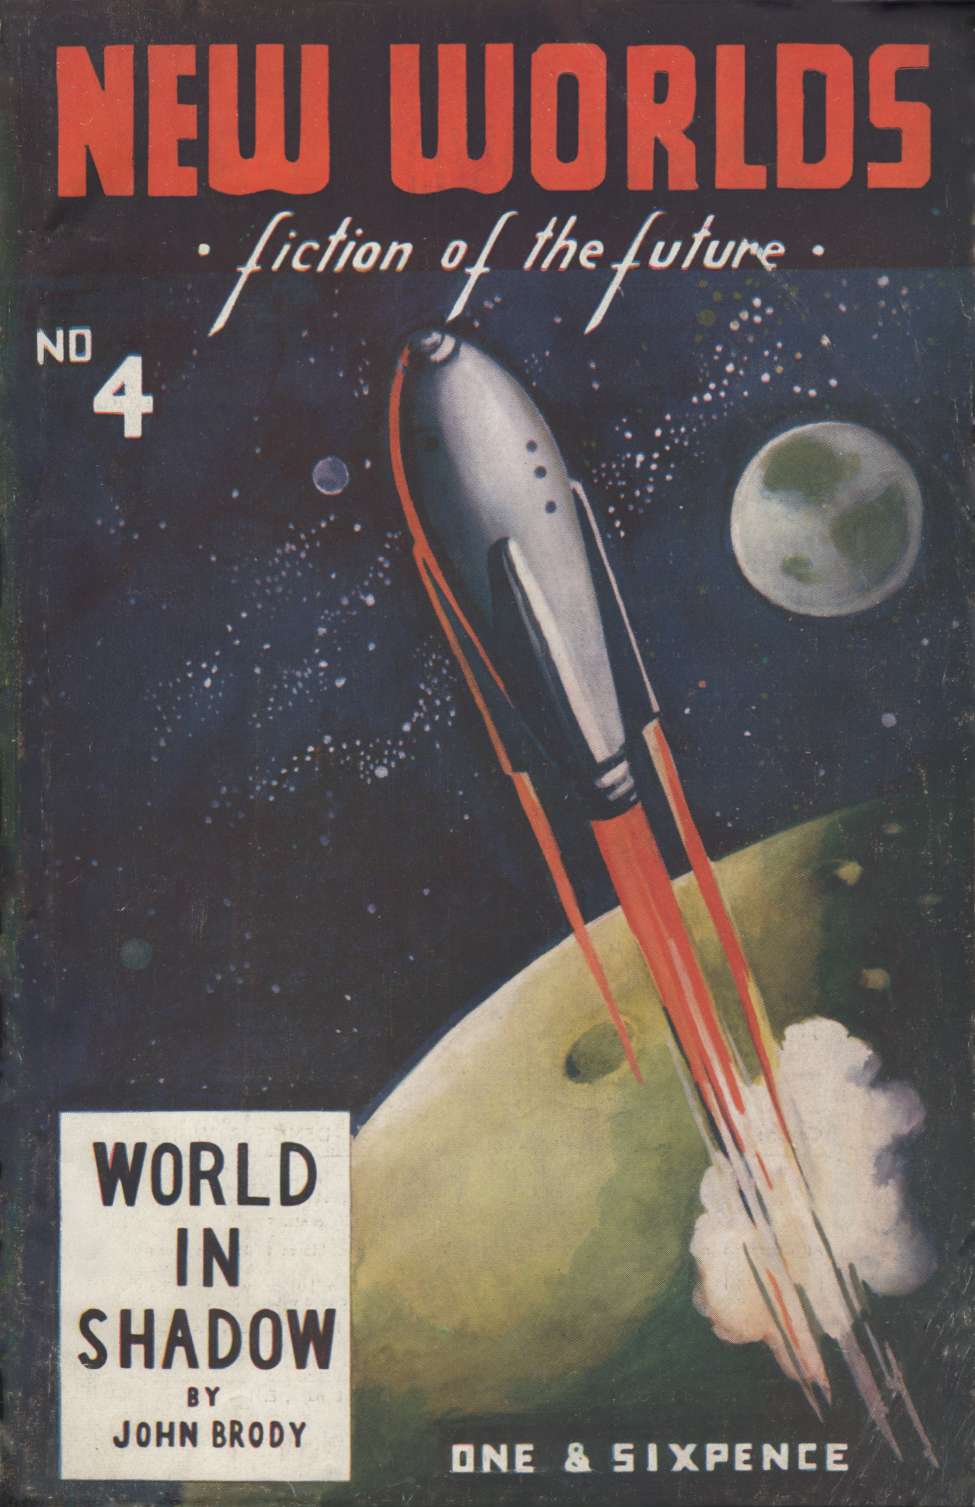 Comic Book Cover For New Worlds v2 4 - World in Shadow - John Brody